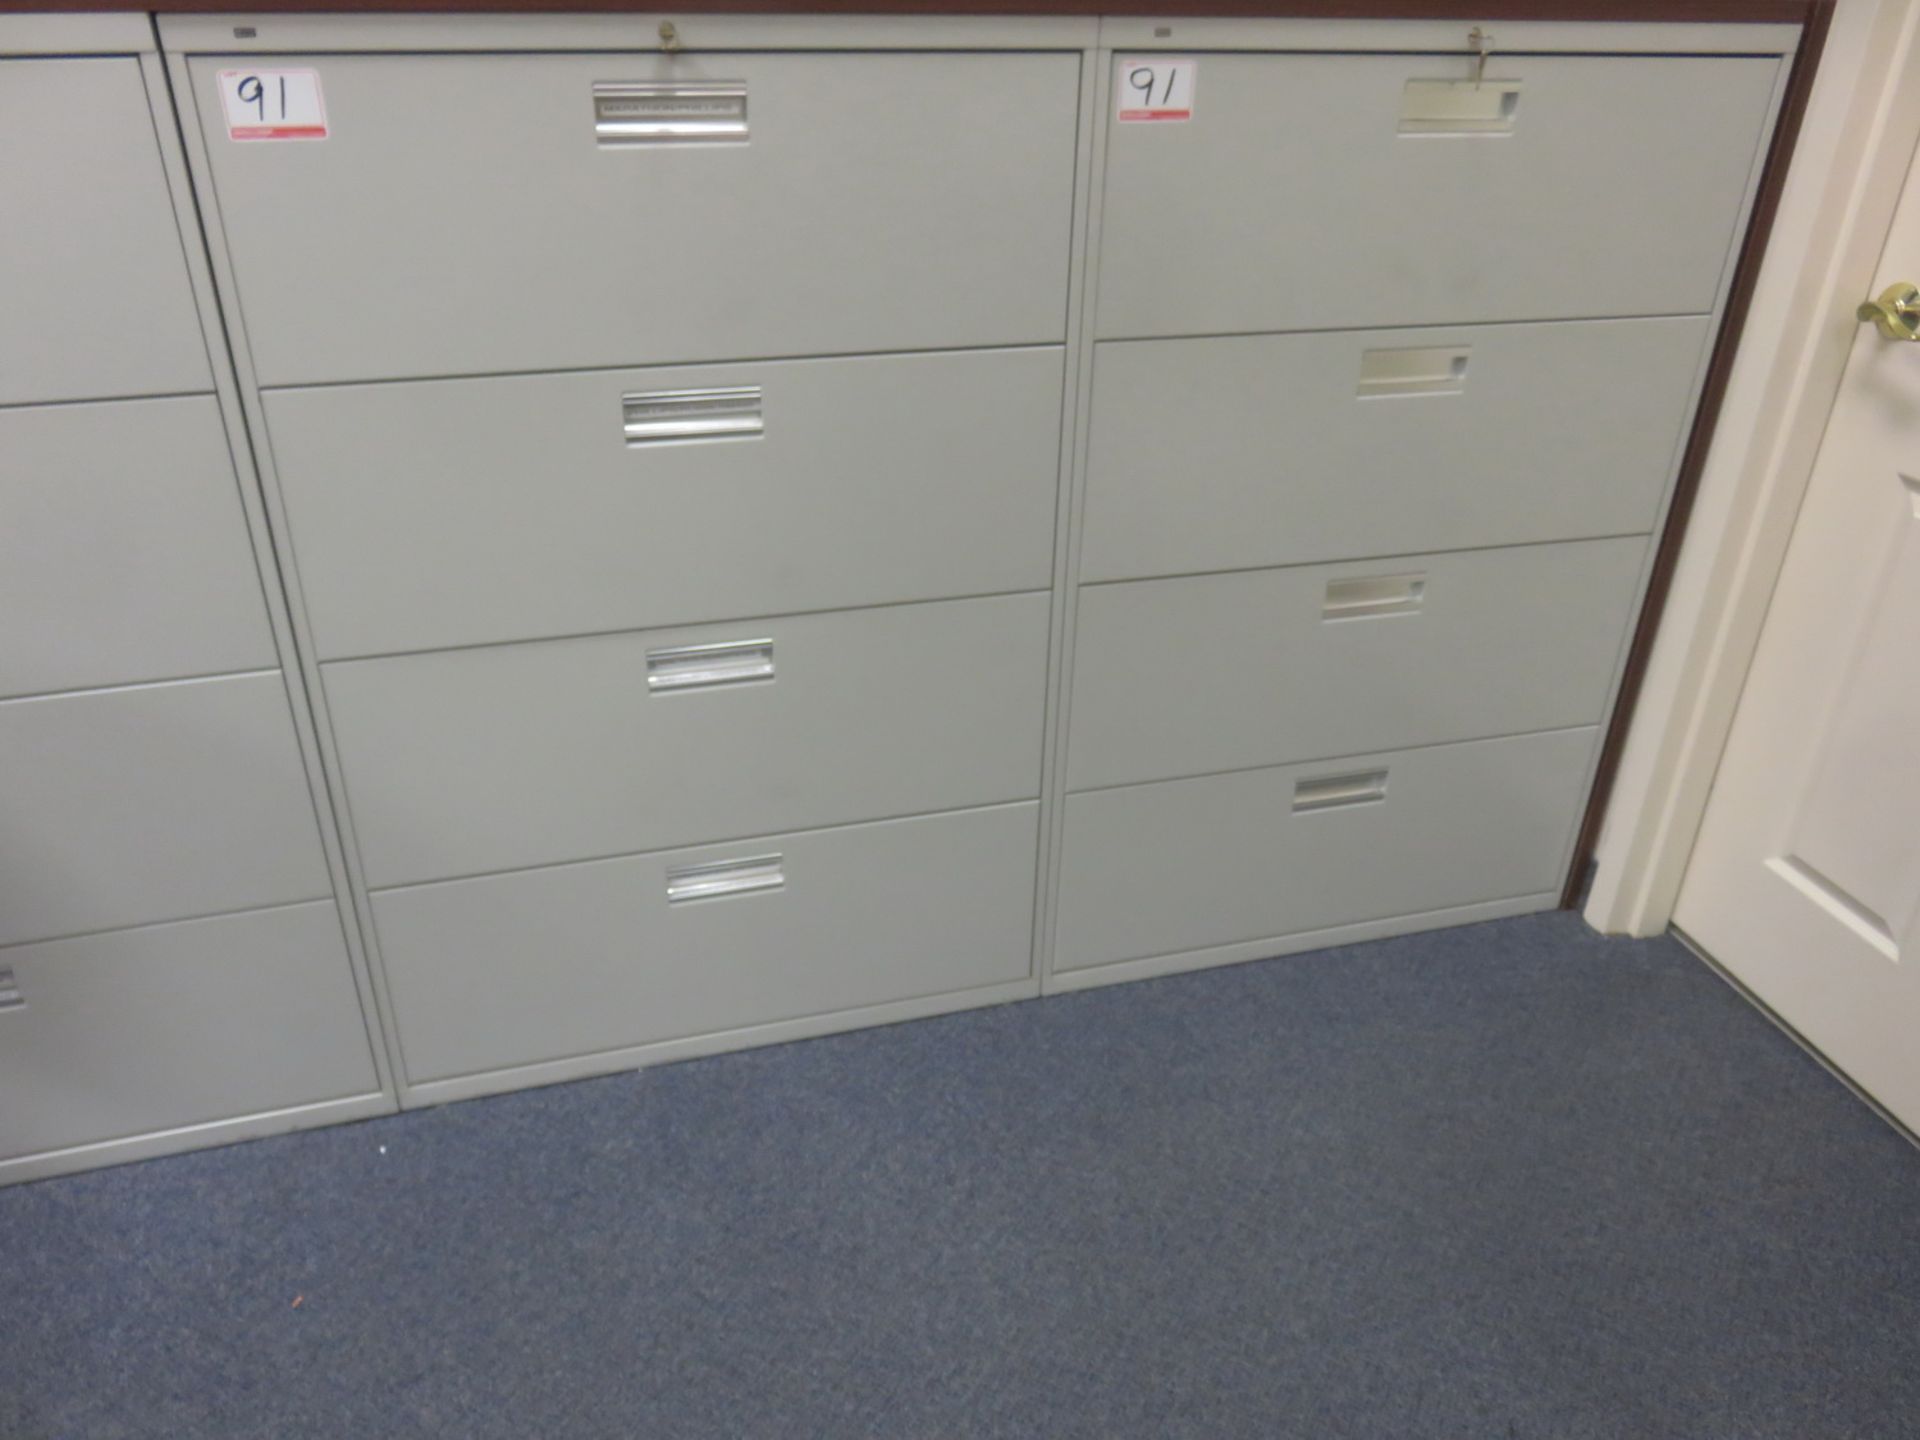 UNITS - HON GREY STEEL 4-DR LATERAL FILING CABINETS